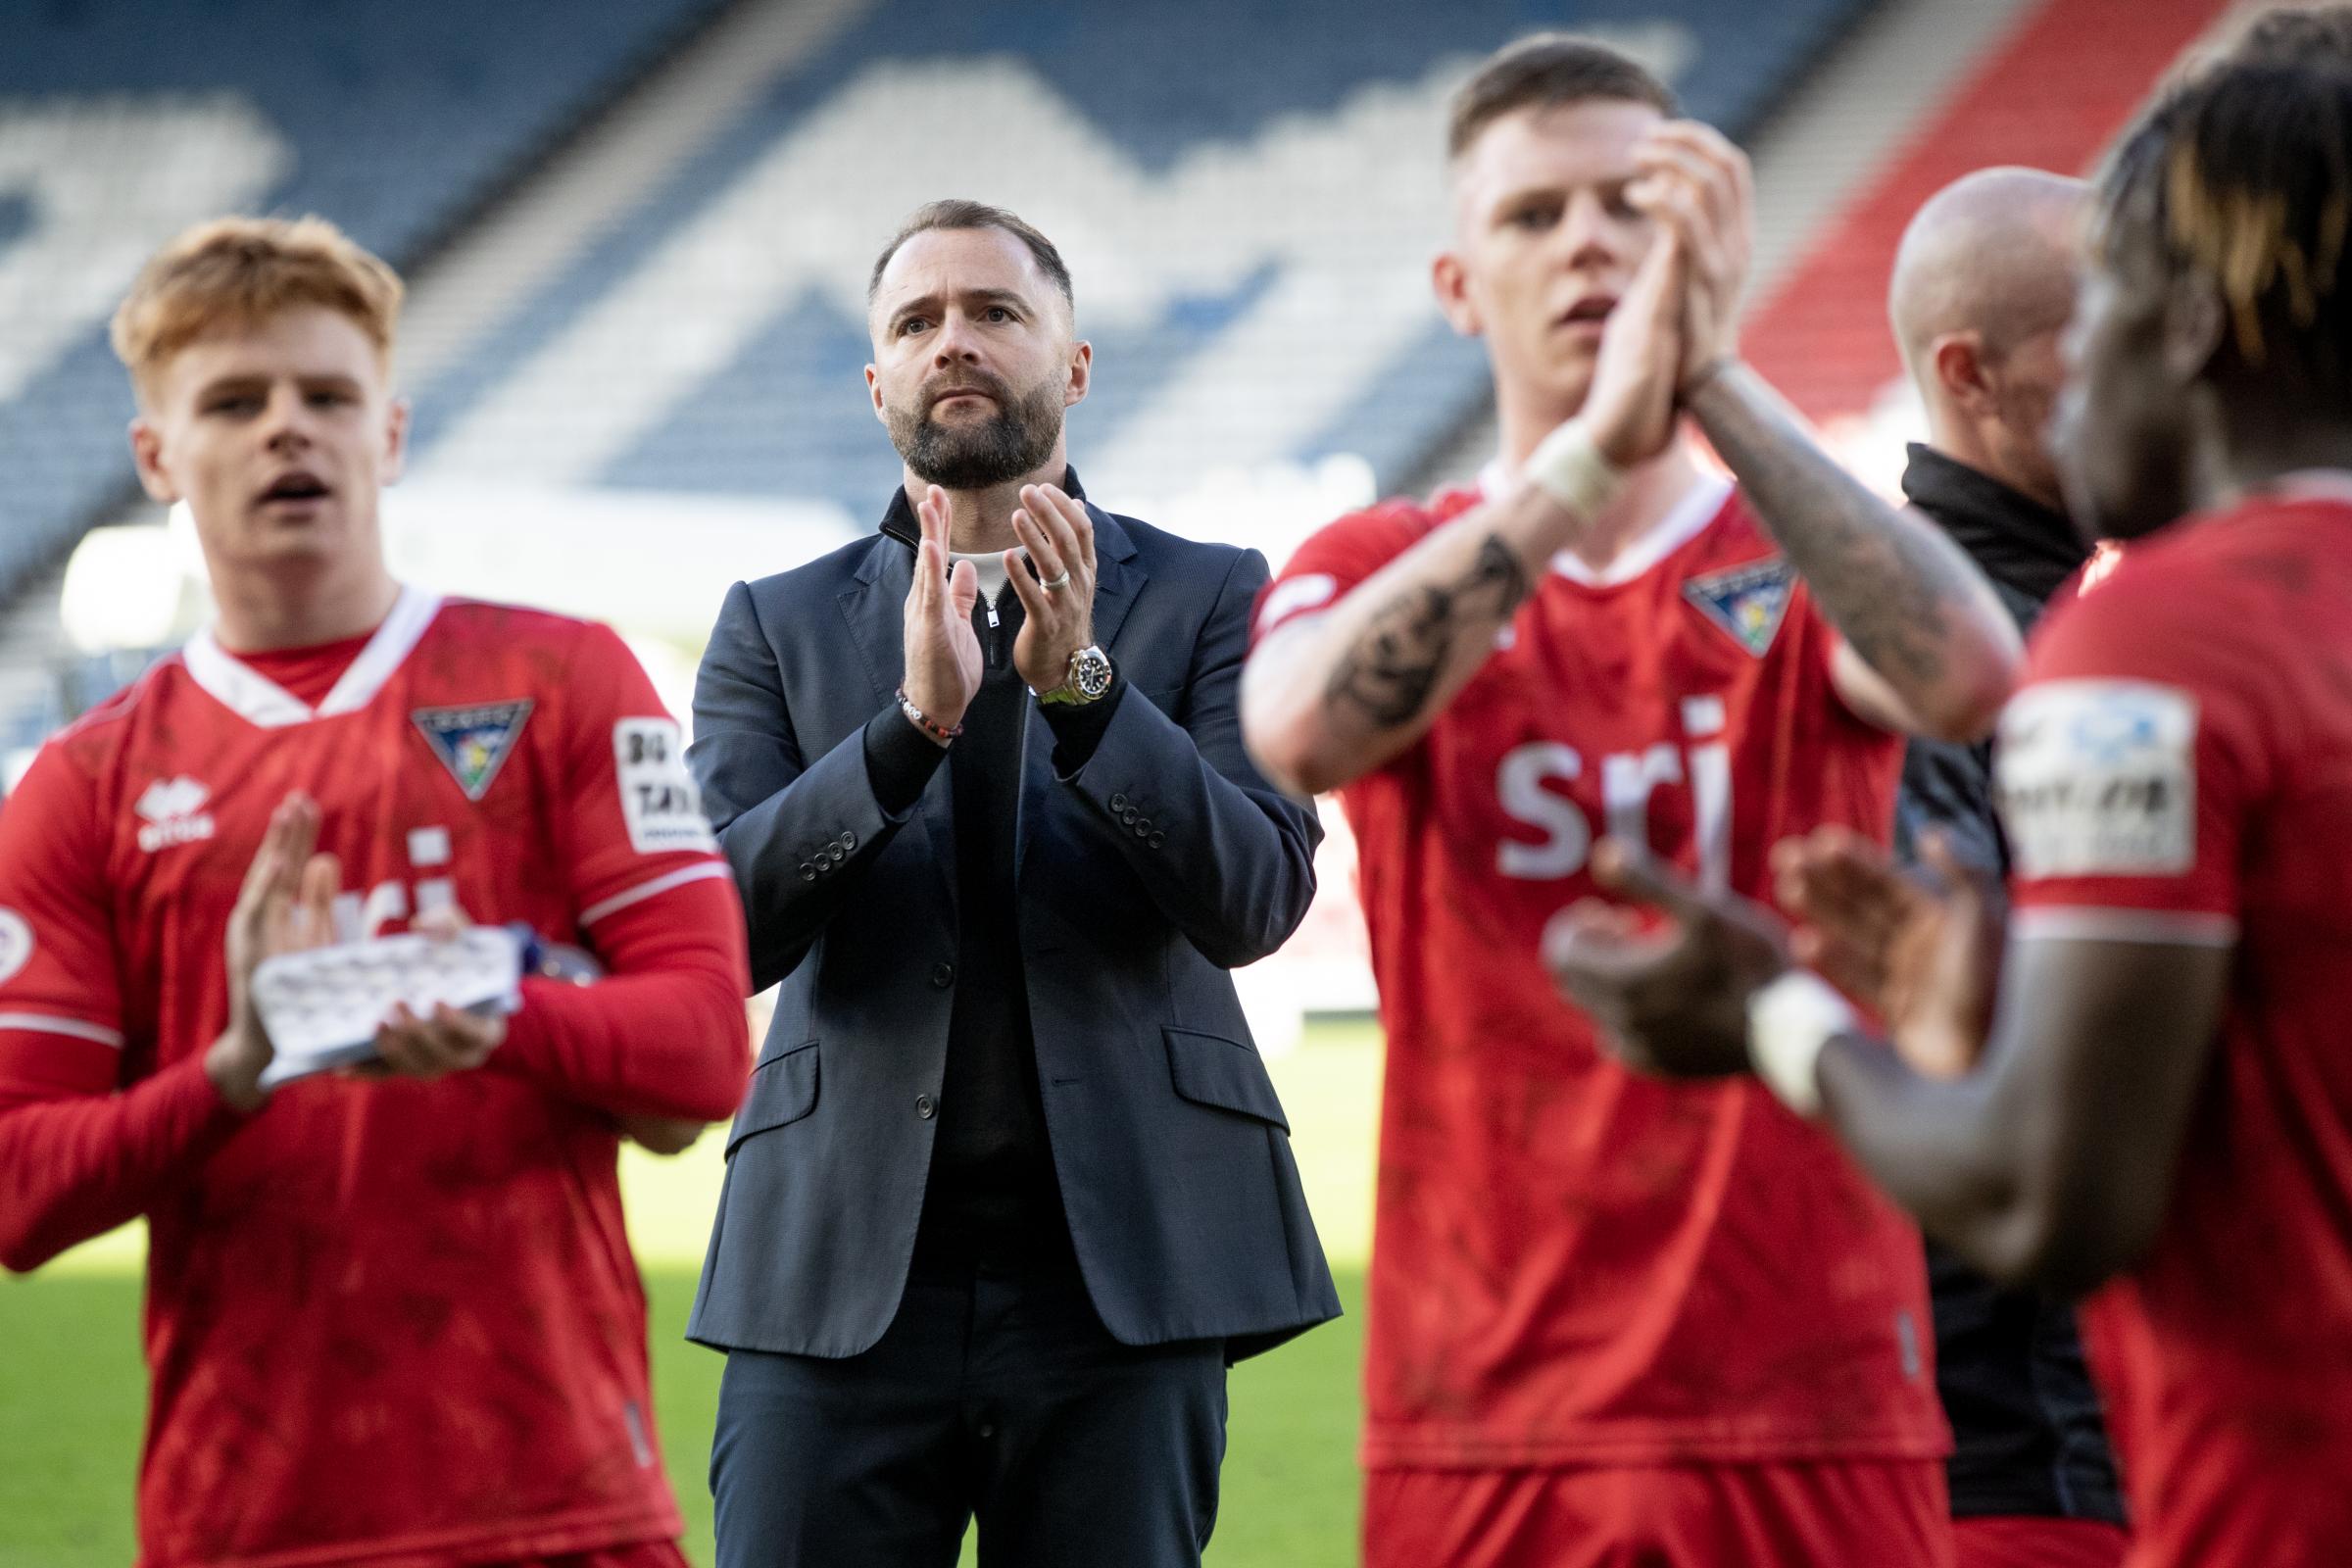 Dunfermline: James McPake on injuries and squad quality